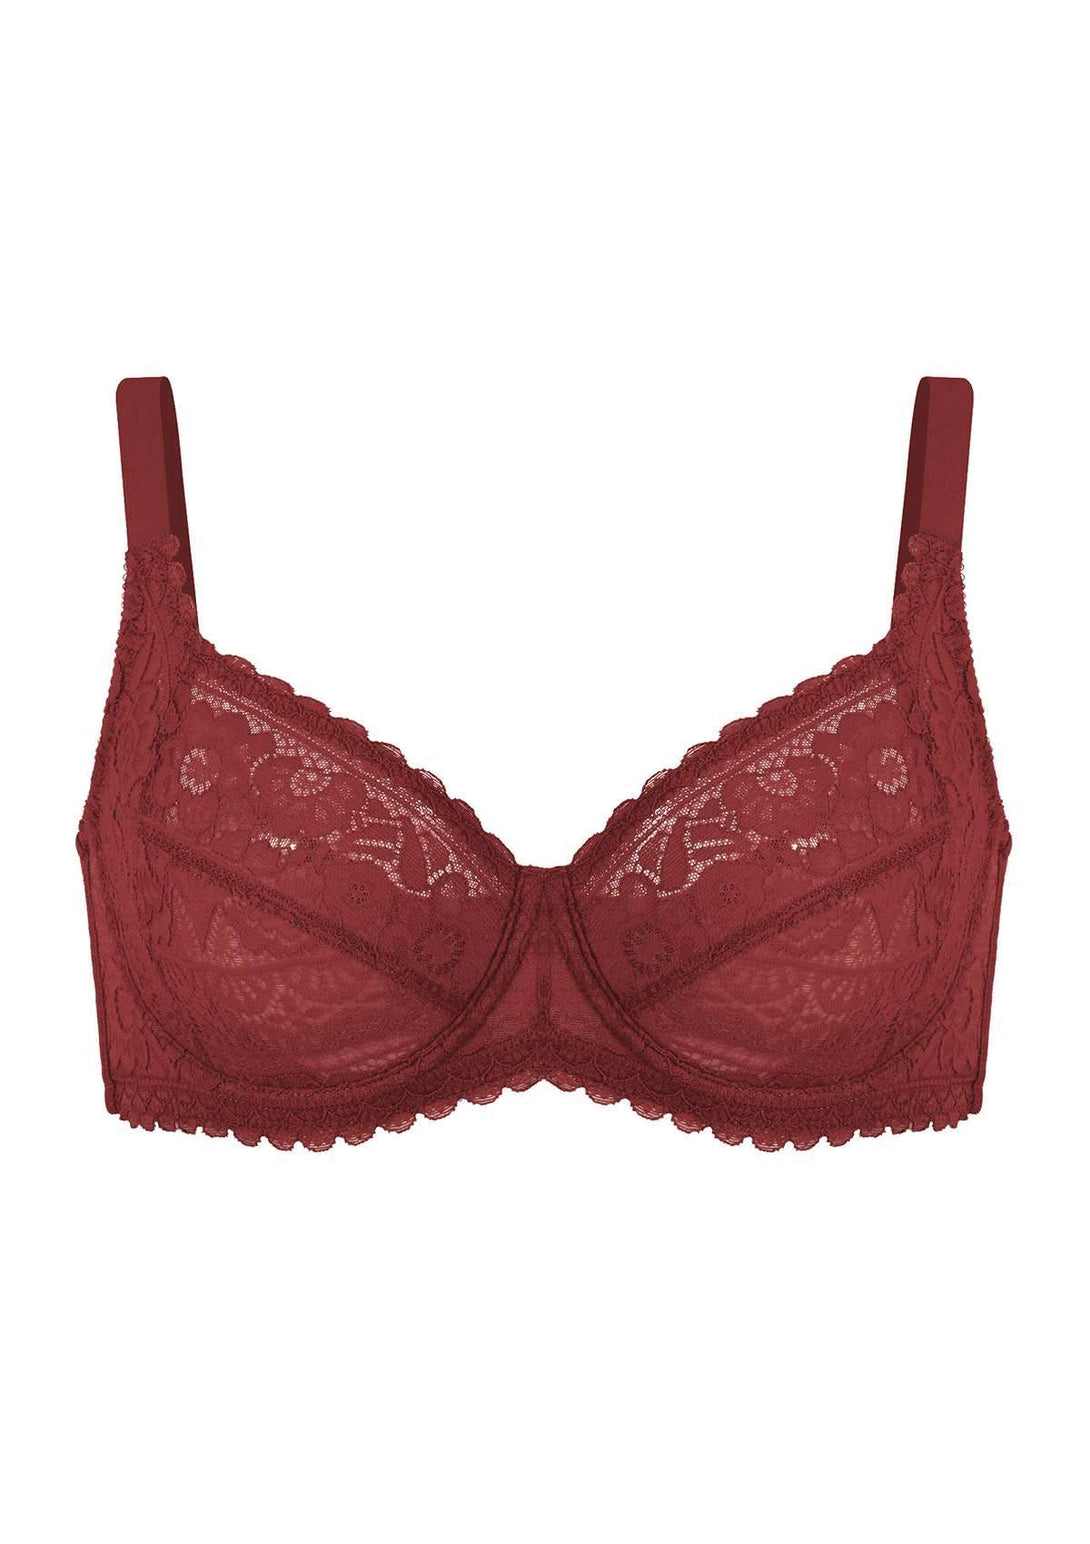 HSIA HSIA Leaf Flower Lace Unlined Bra